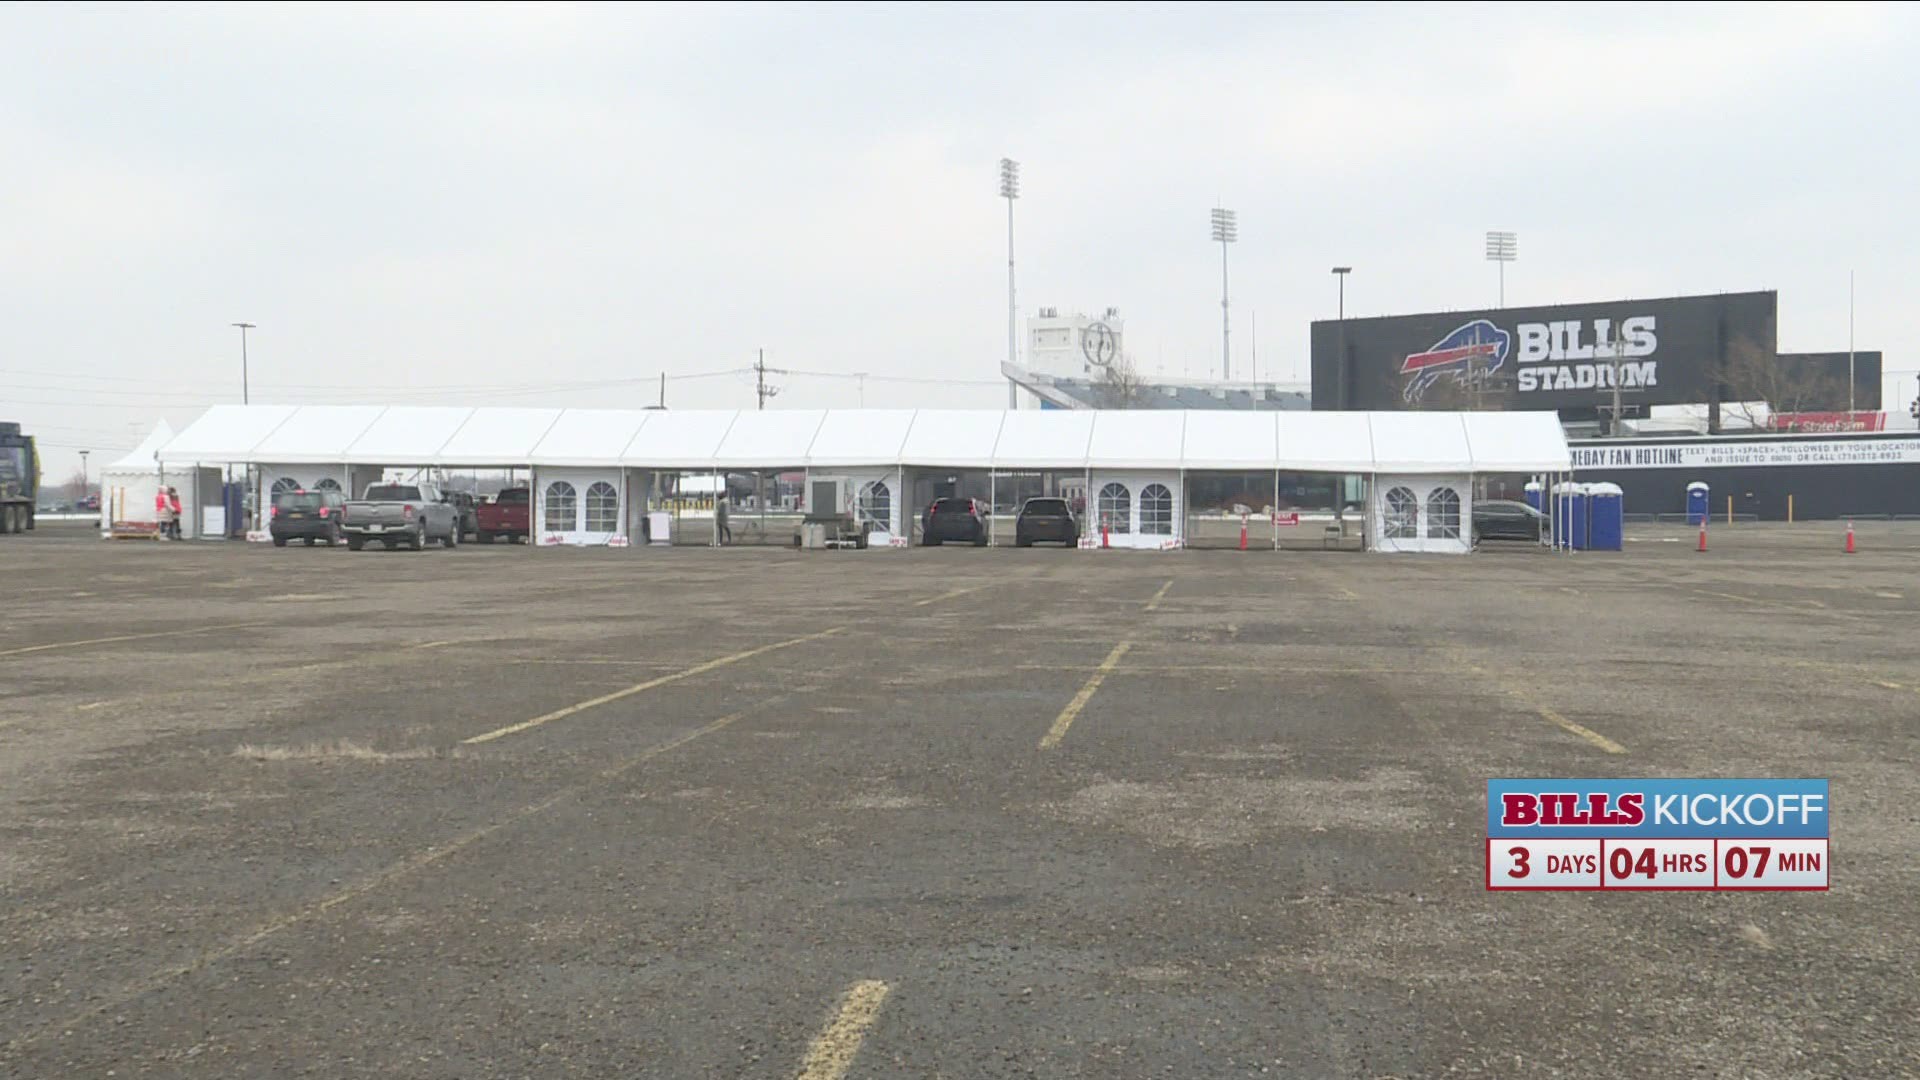 Fans start getting tested for Saturday Bills game